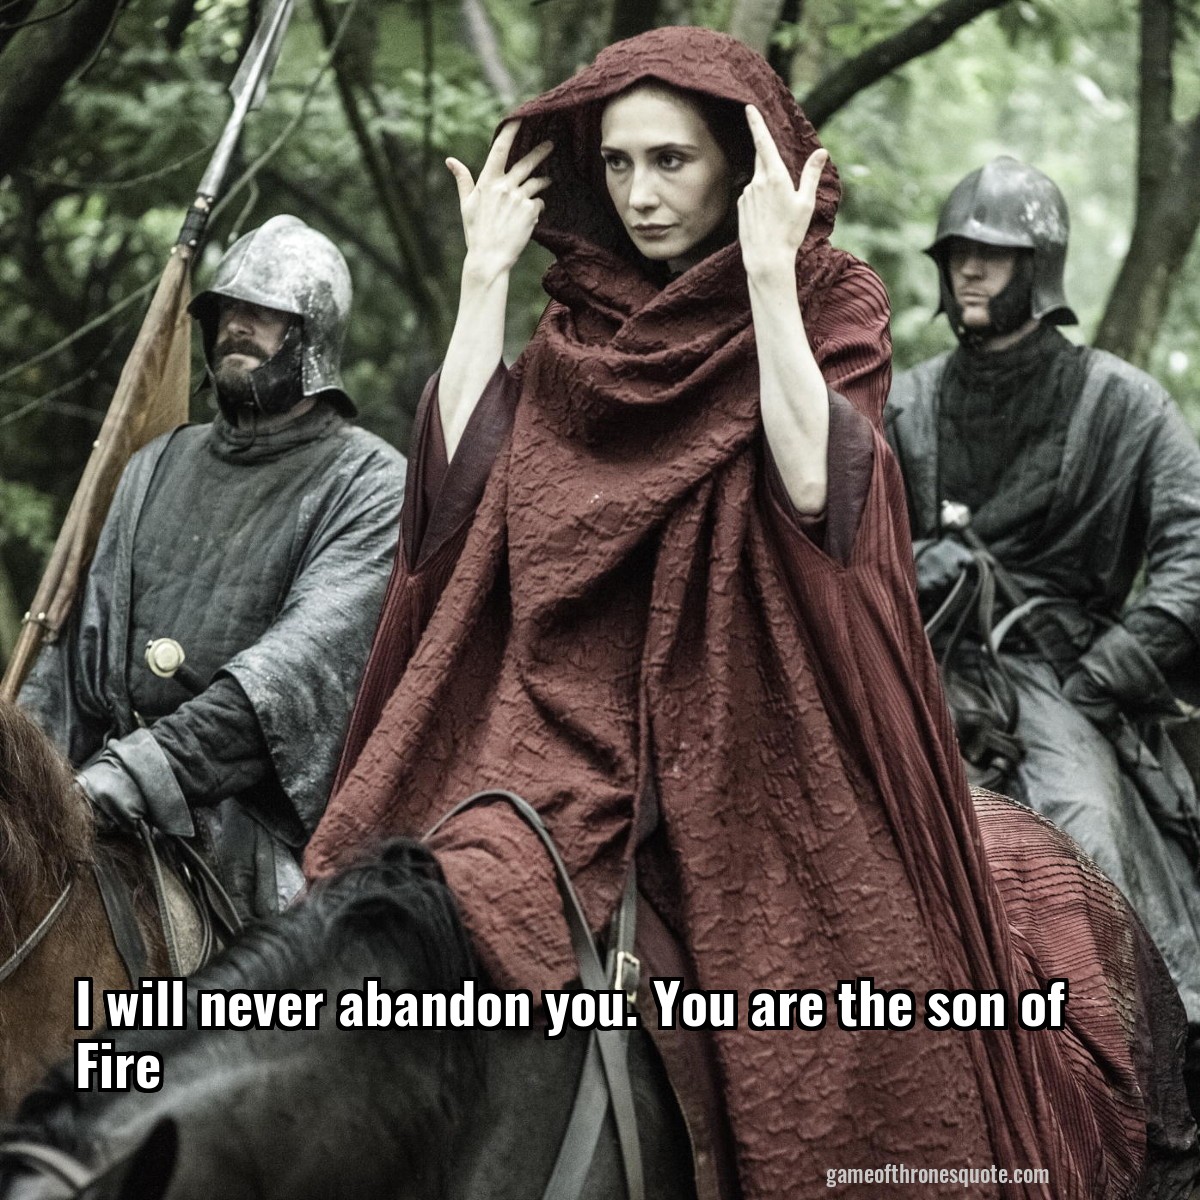 I will never abandon you. You are the son of Fire